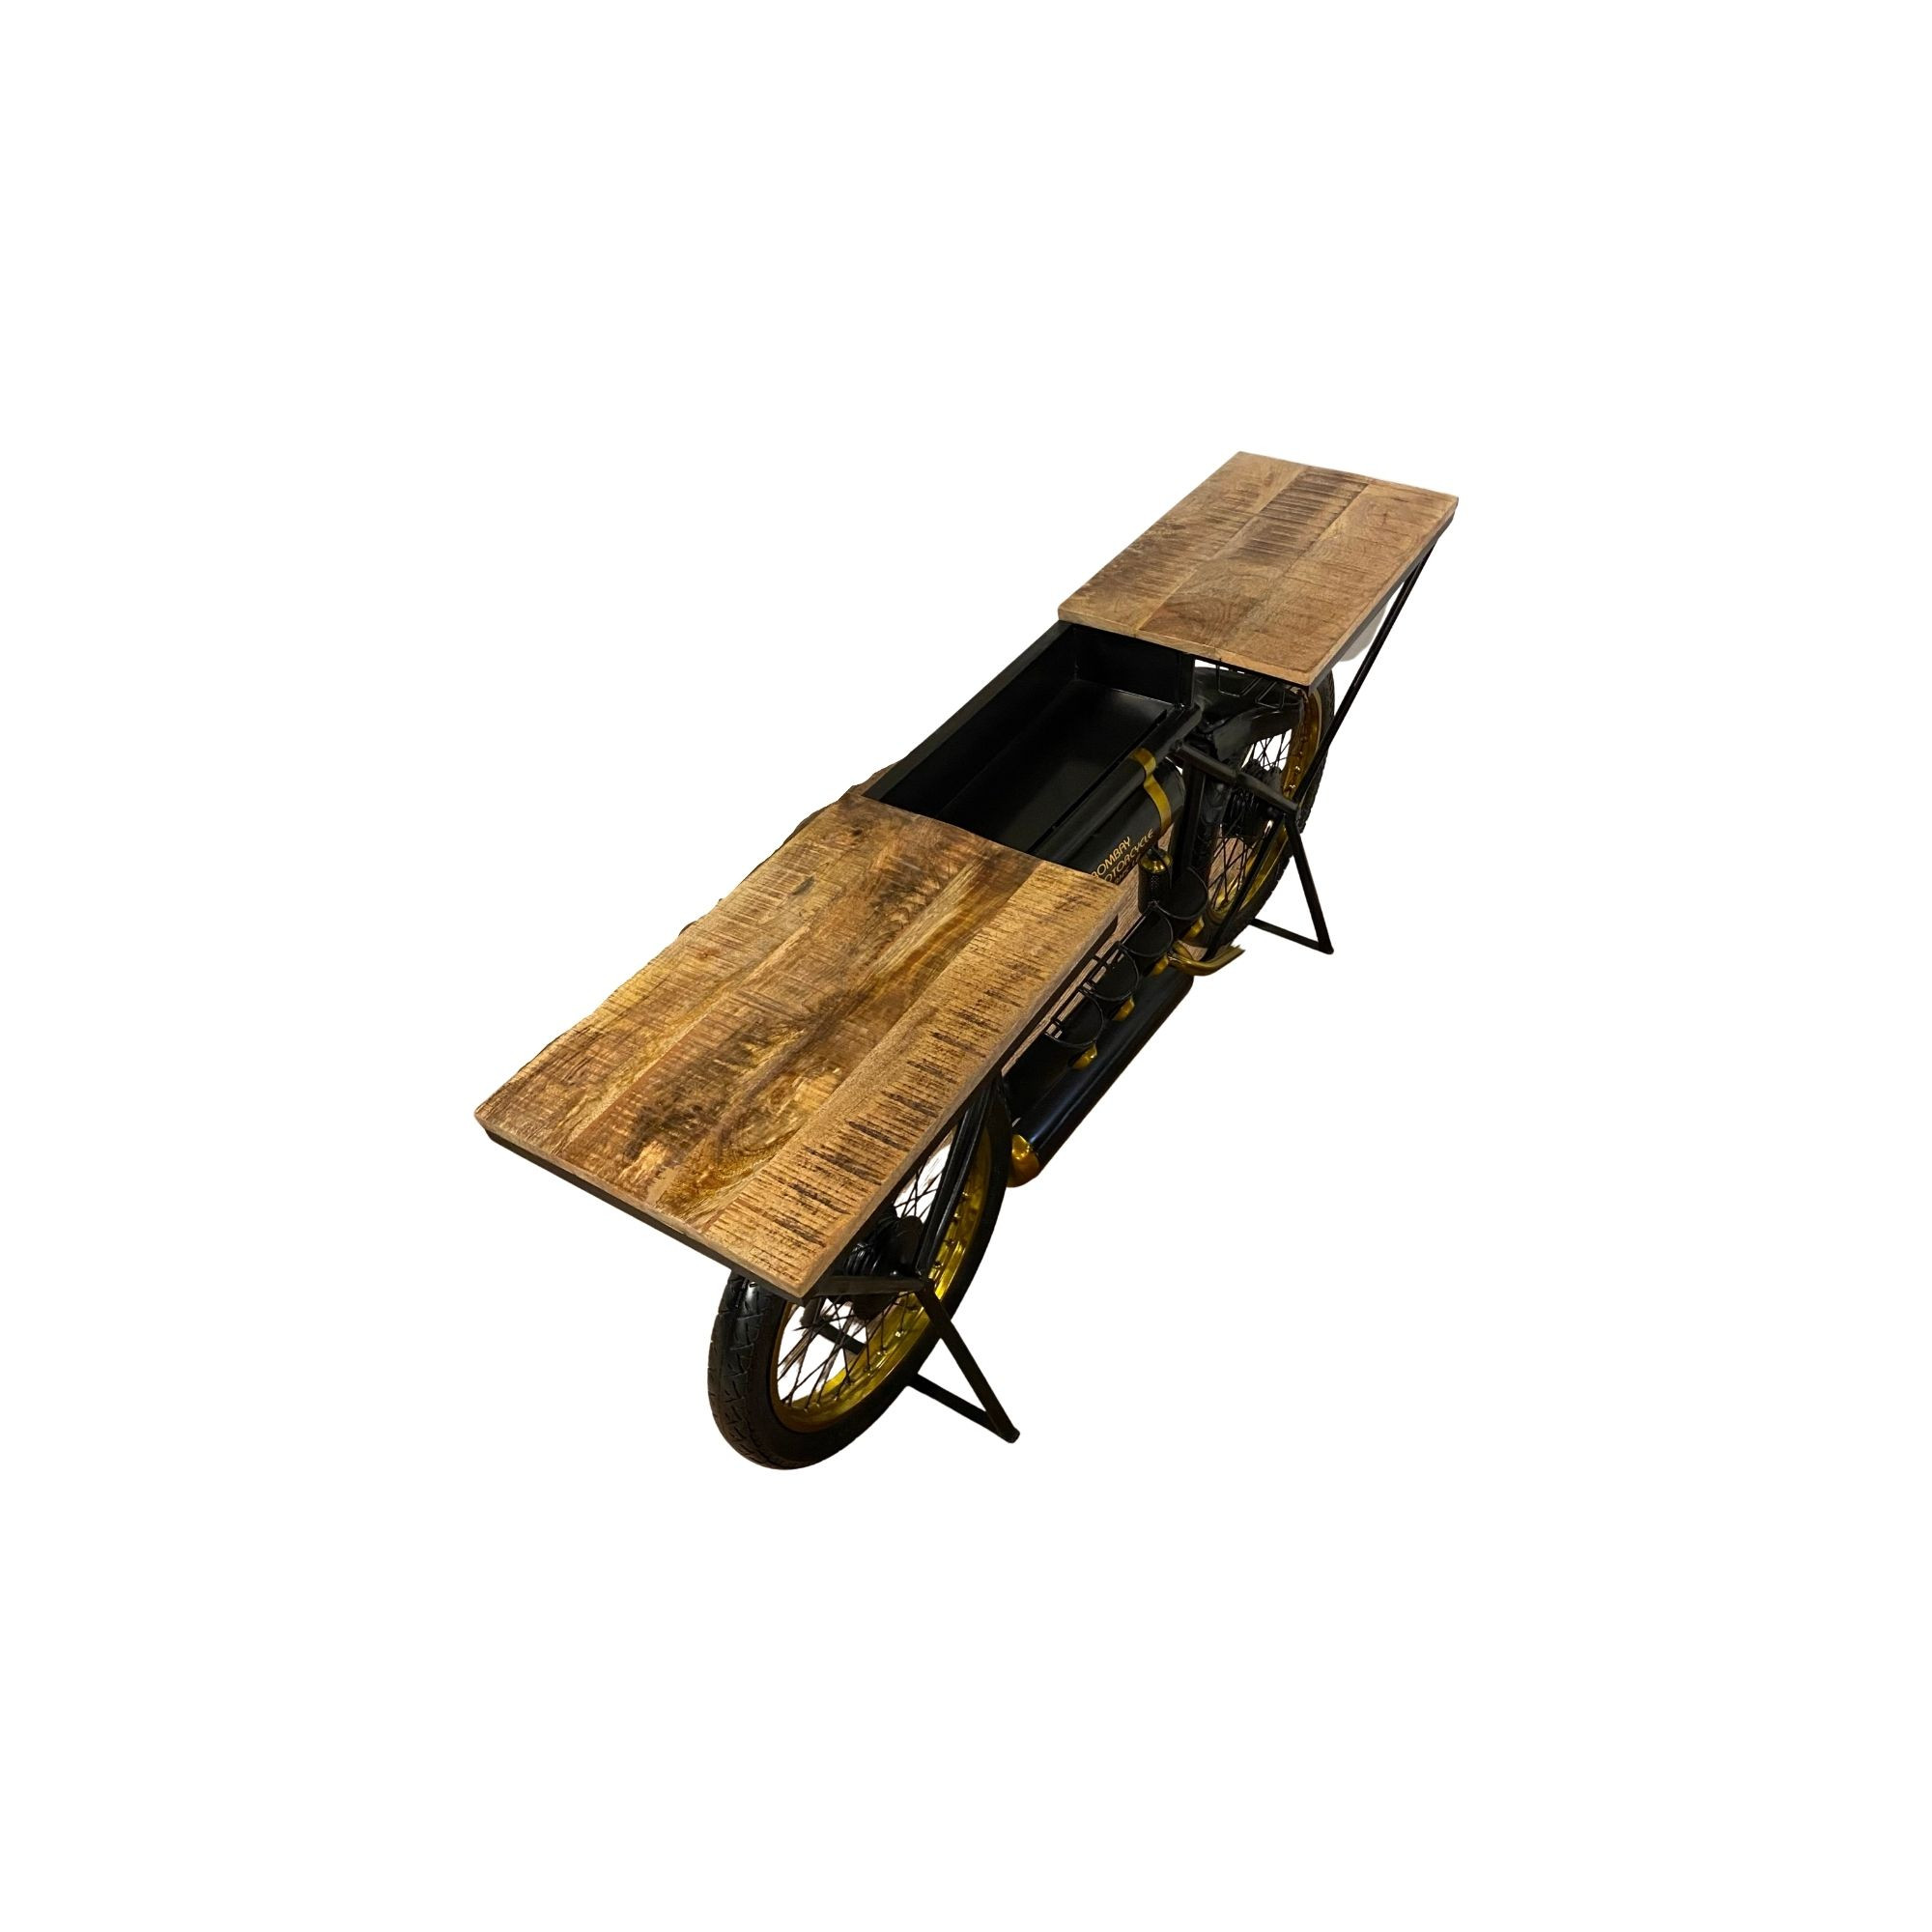 16" X 71.5" X 32.5" Black and Gold Bombay Motorcycle Bar